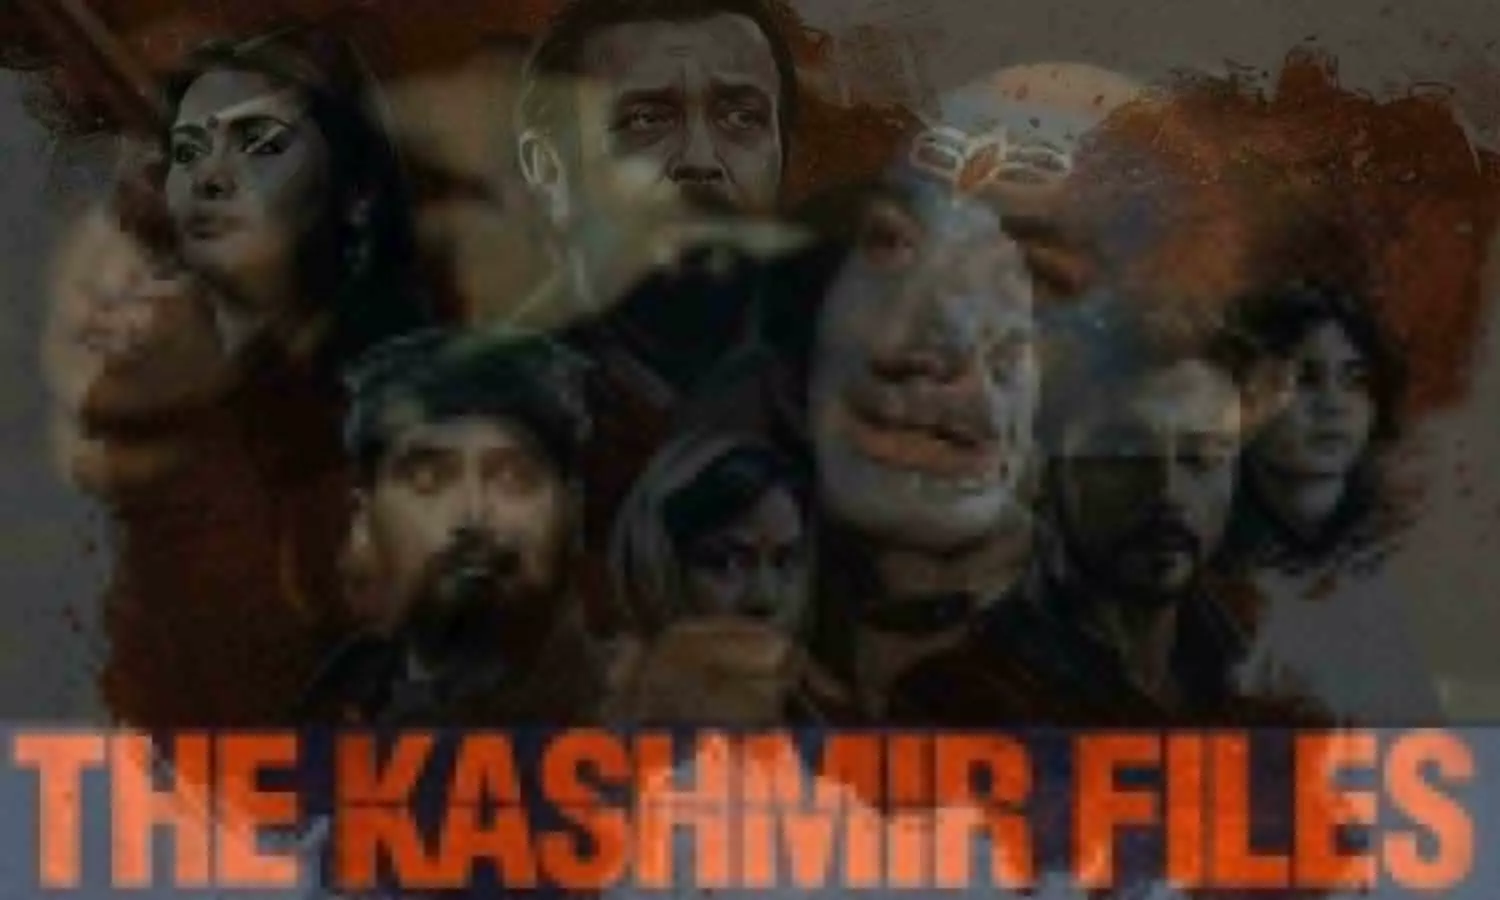 There is a dark face in the mirror The Kashmir Files